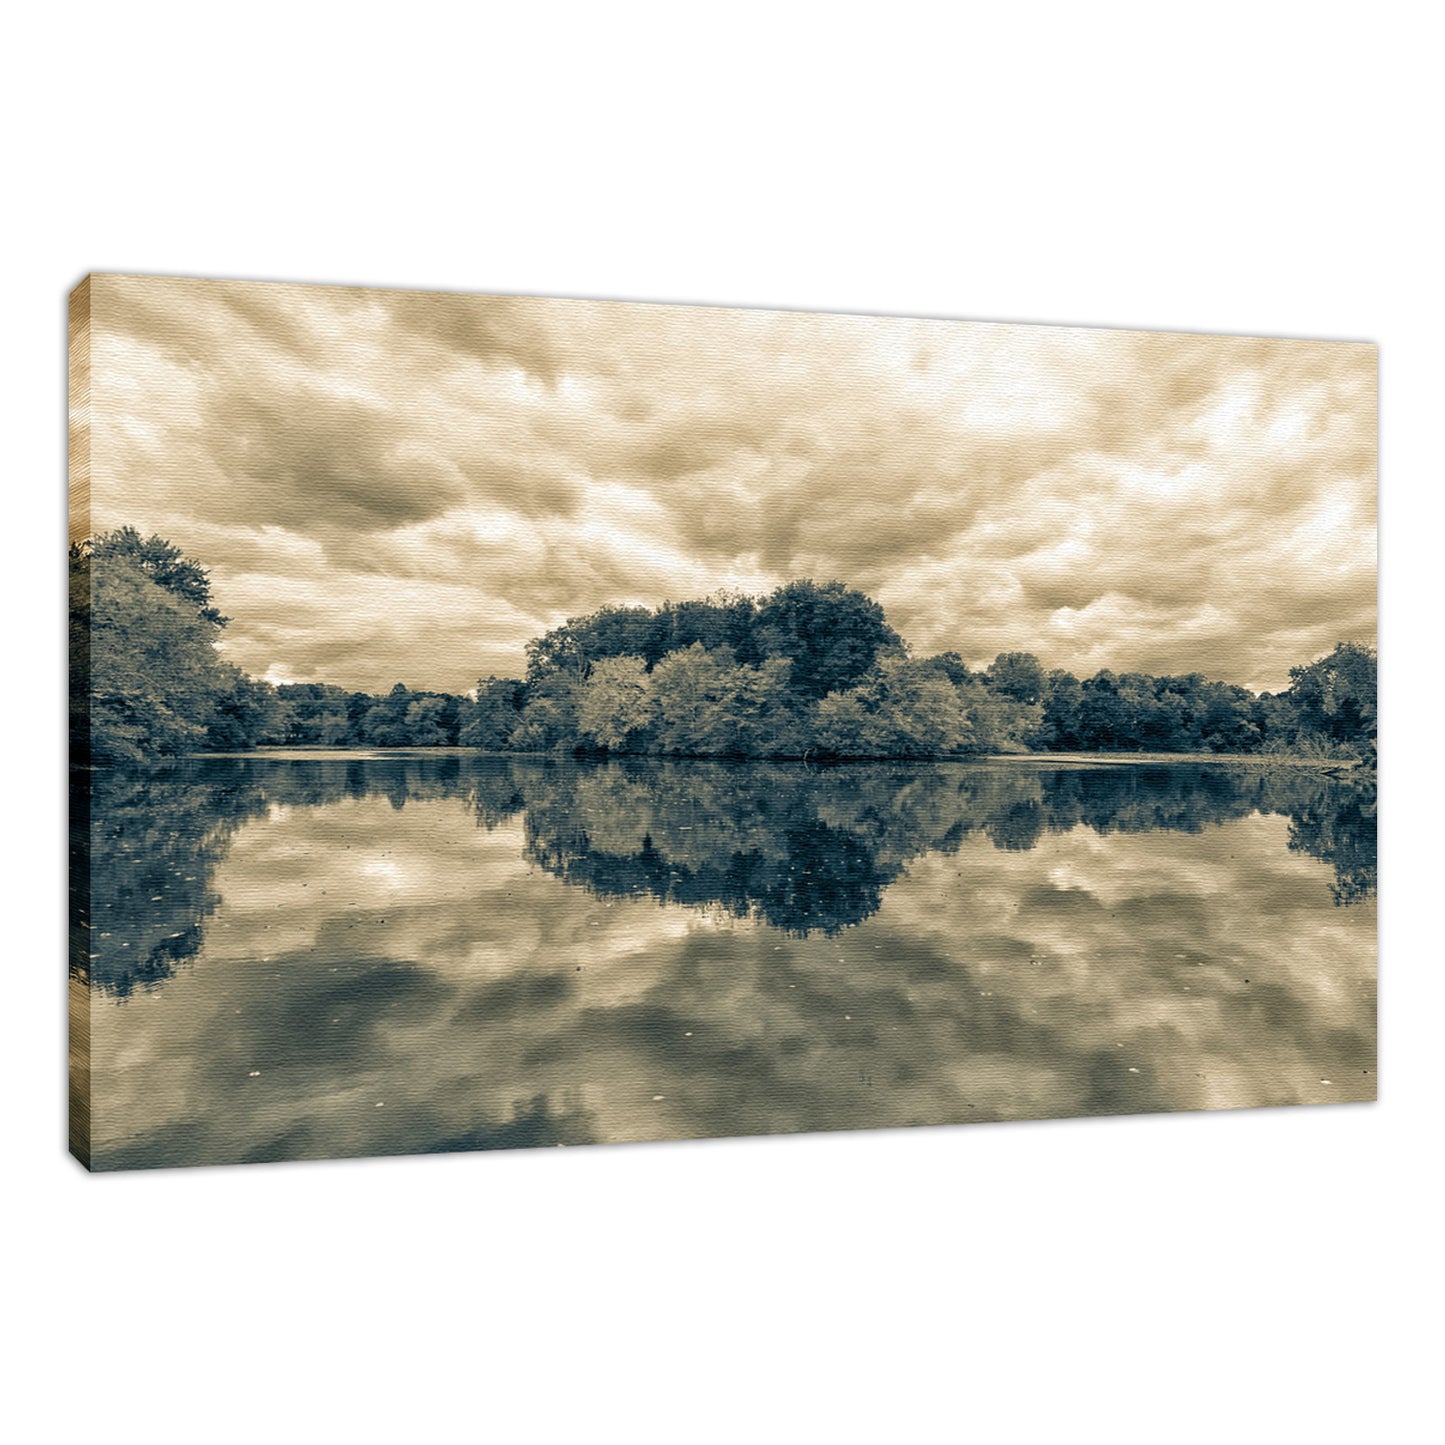 Wall Art Aesthetic: Autumn Reflections Split Toned - Rustic / Rural / Country Style Landscape / Nature / Botanical Photograph Fine Art Canvas Wall Art Prints